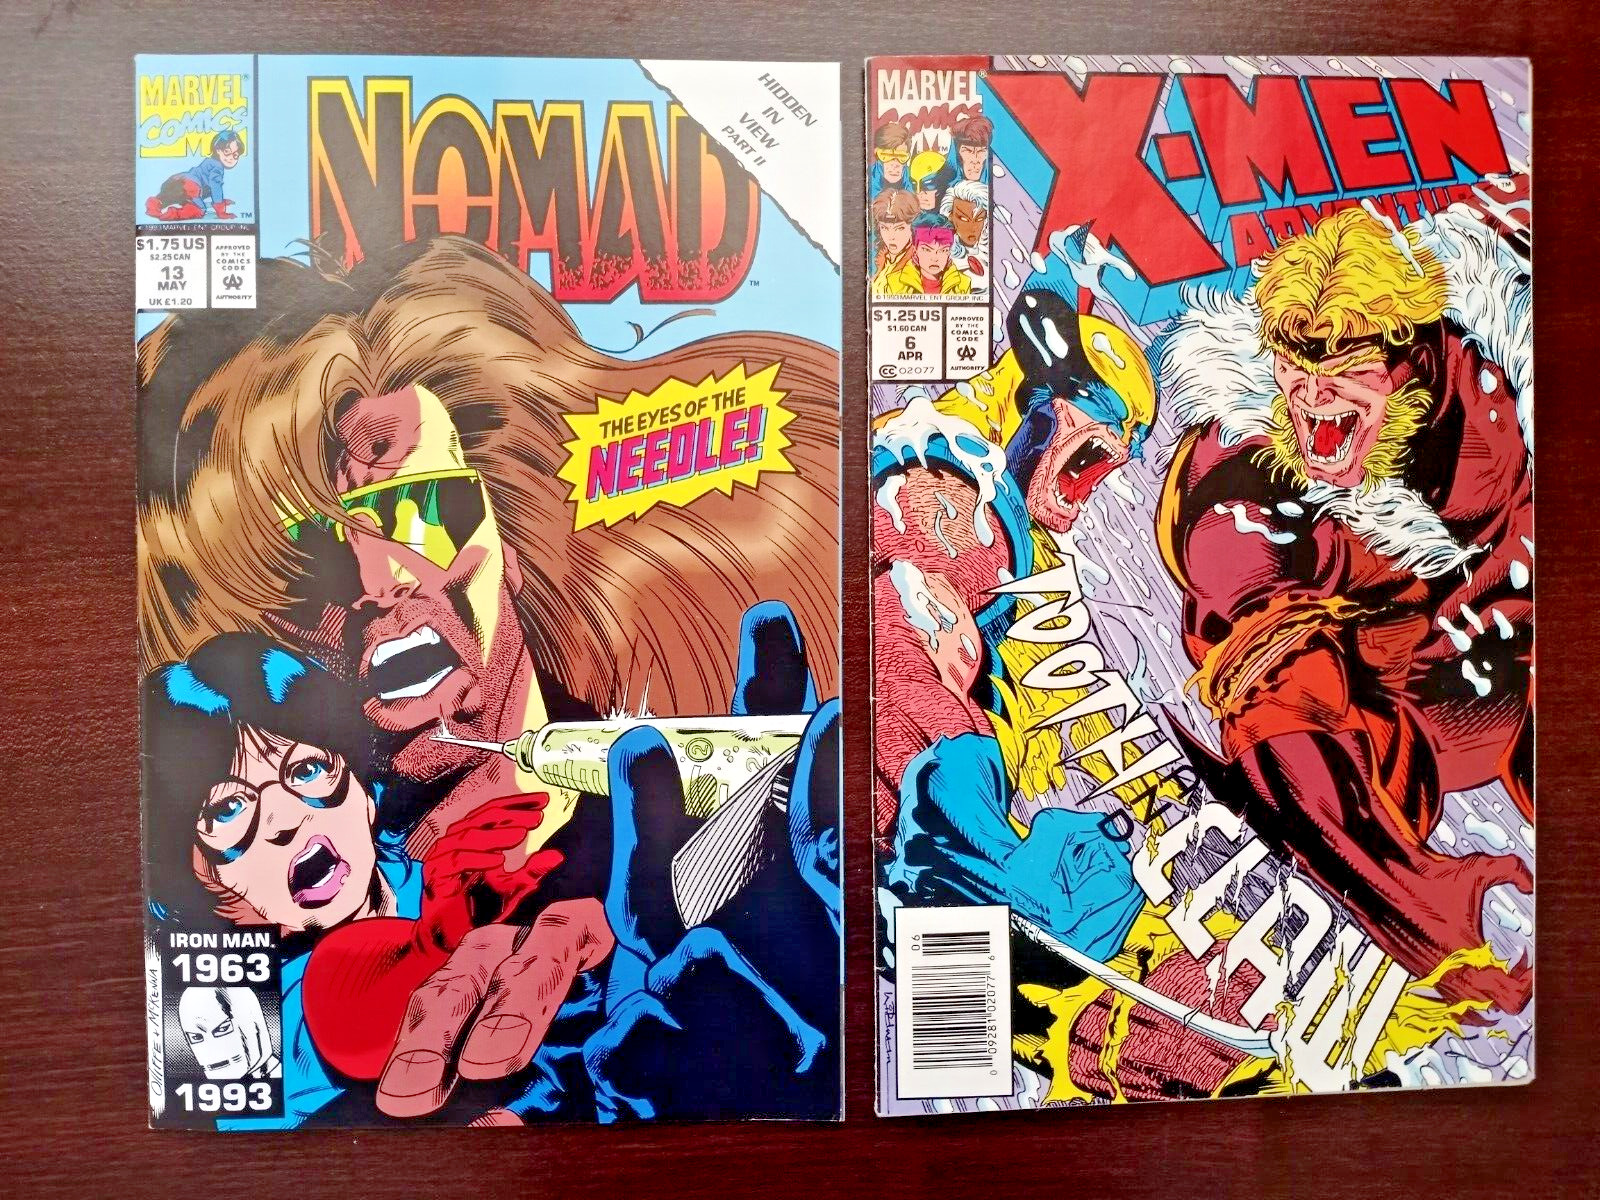 1993 Marvel Comics X-Men #6 Tooth & Claw & Nomad #13 The Eyes of the Needle